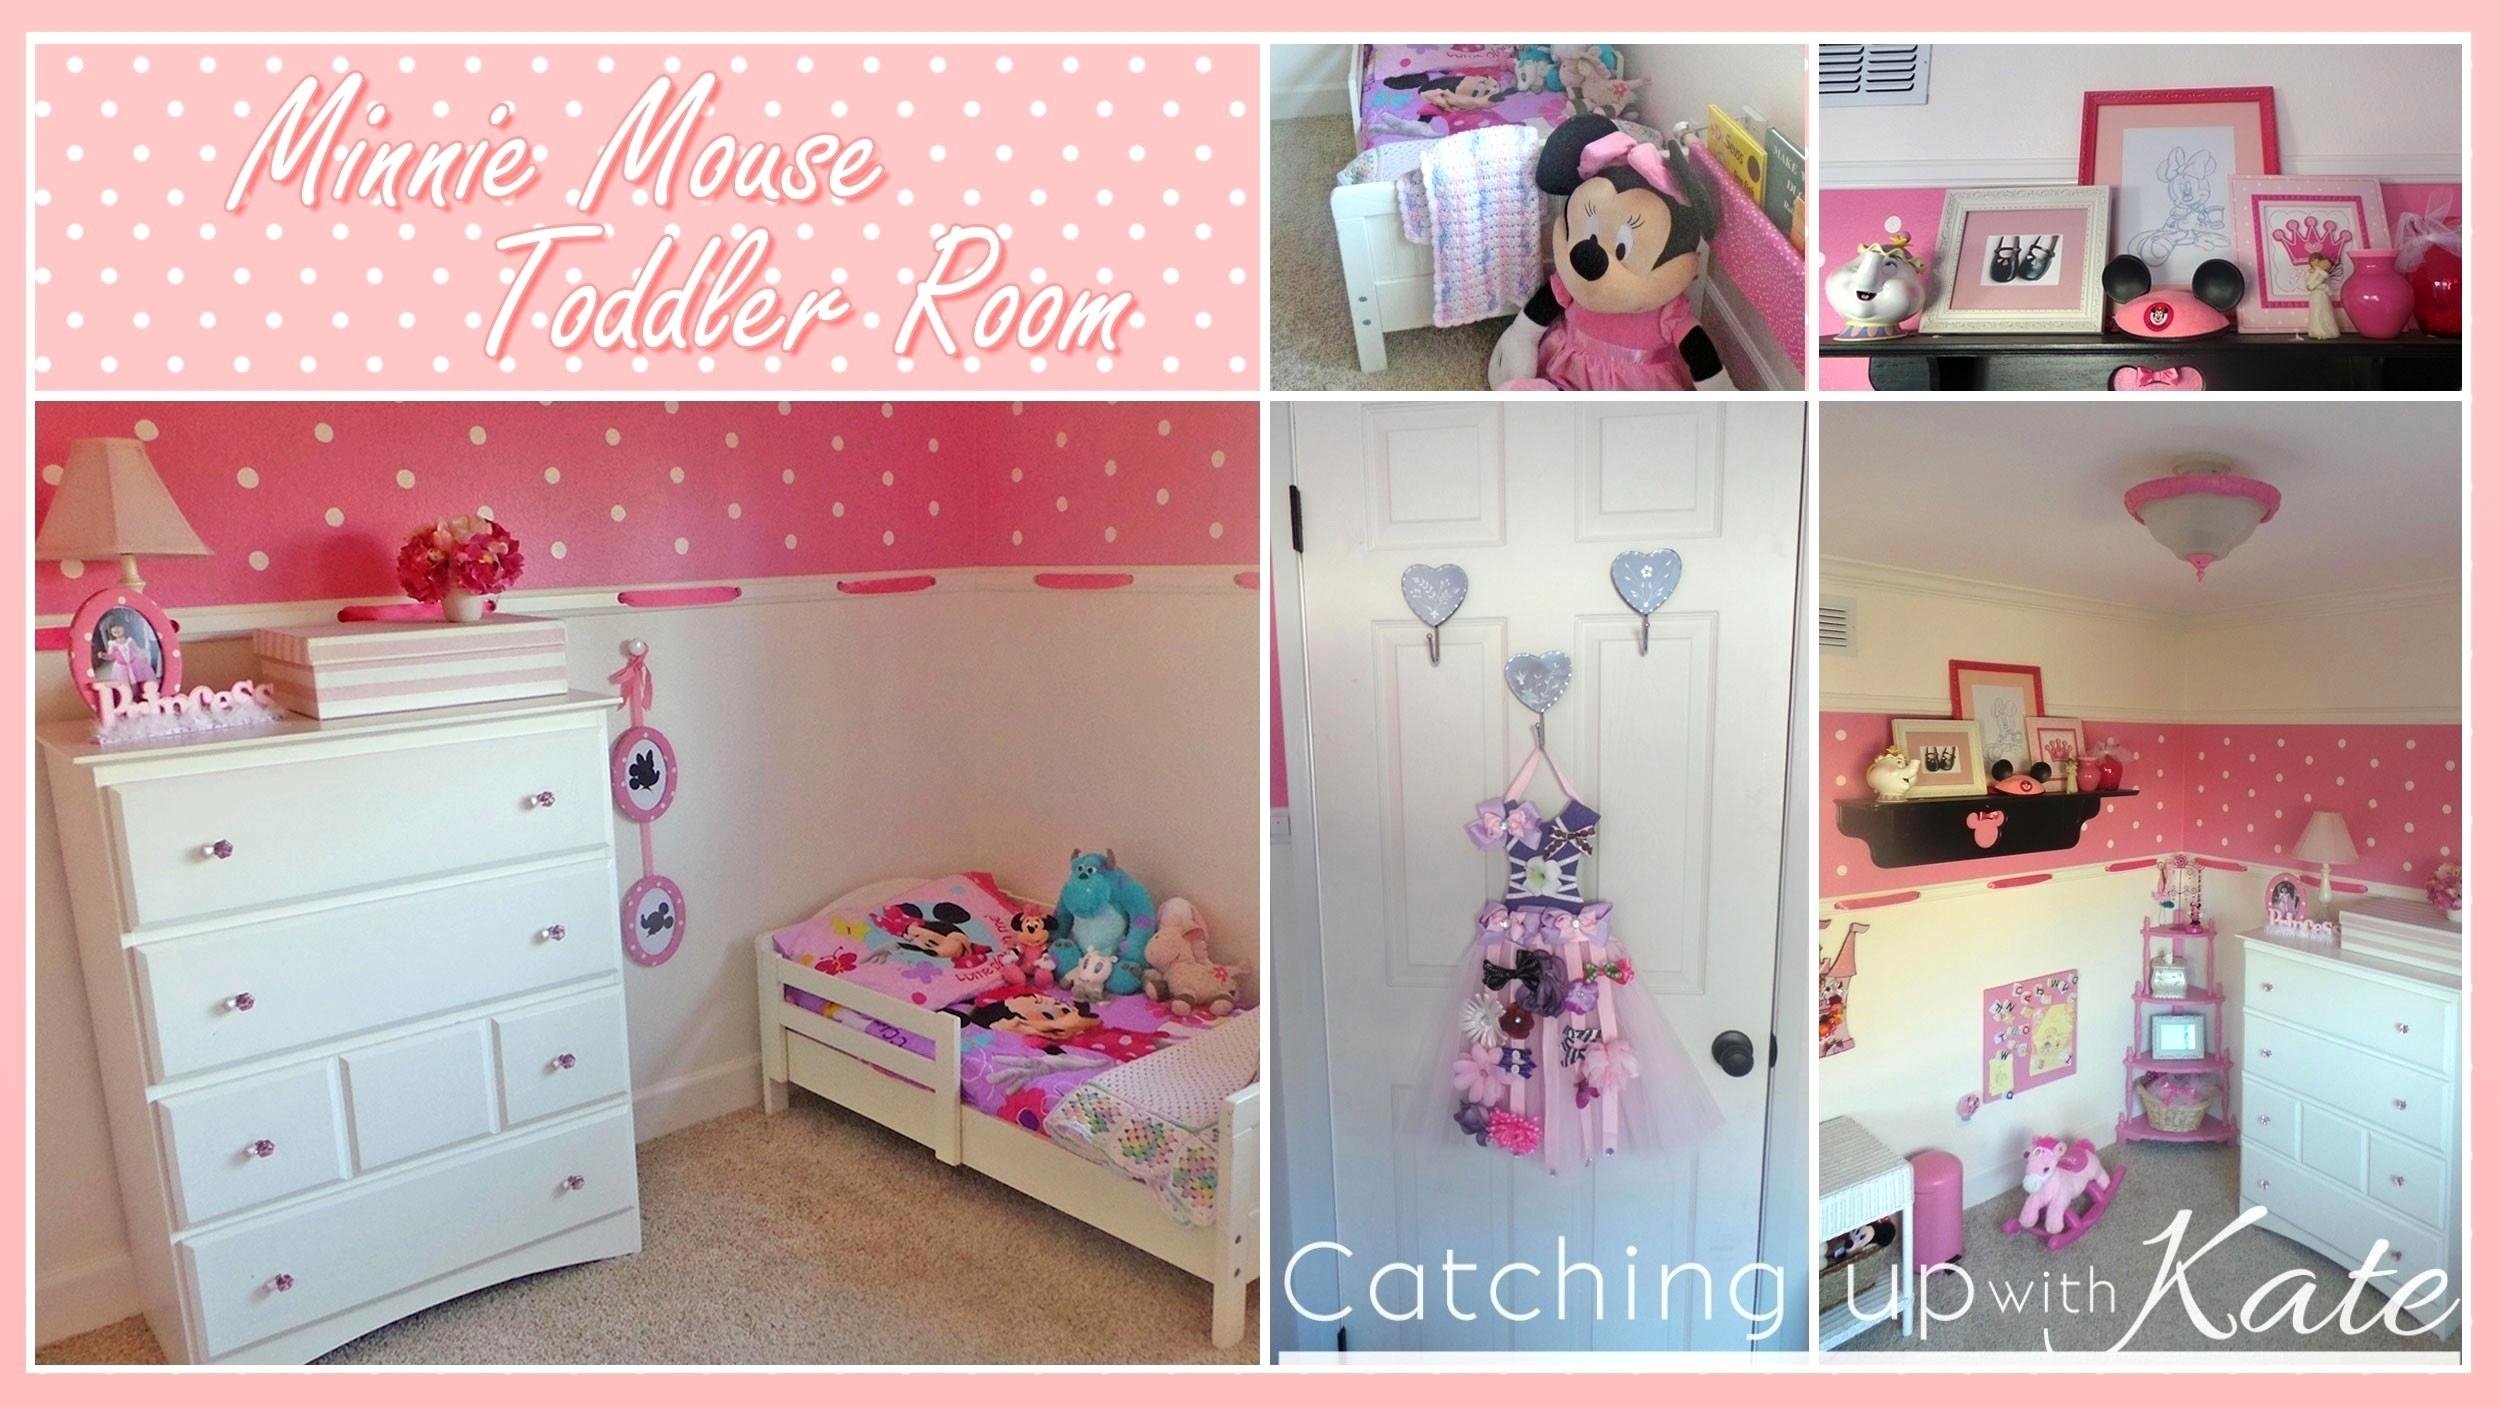 10 Great Minnie Mouse Room Decorating Ideas overwhelming minnie mouse room decorating ideas best minnie mouse 2023